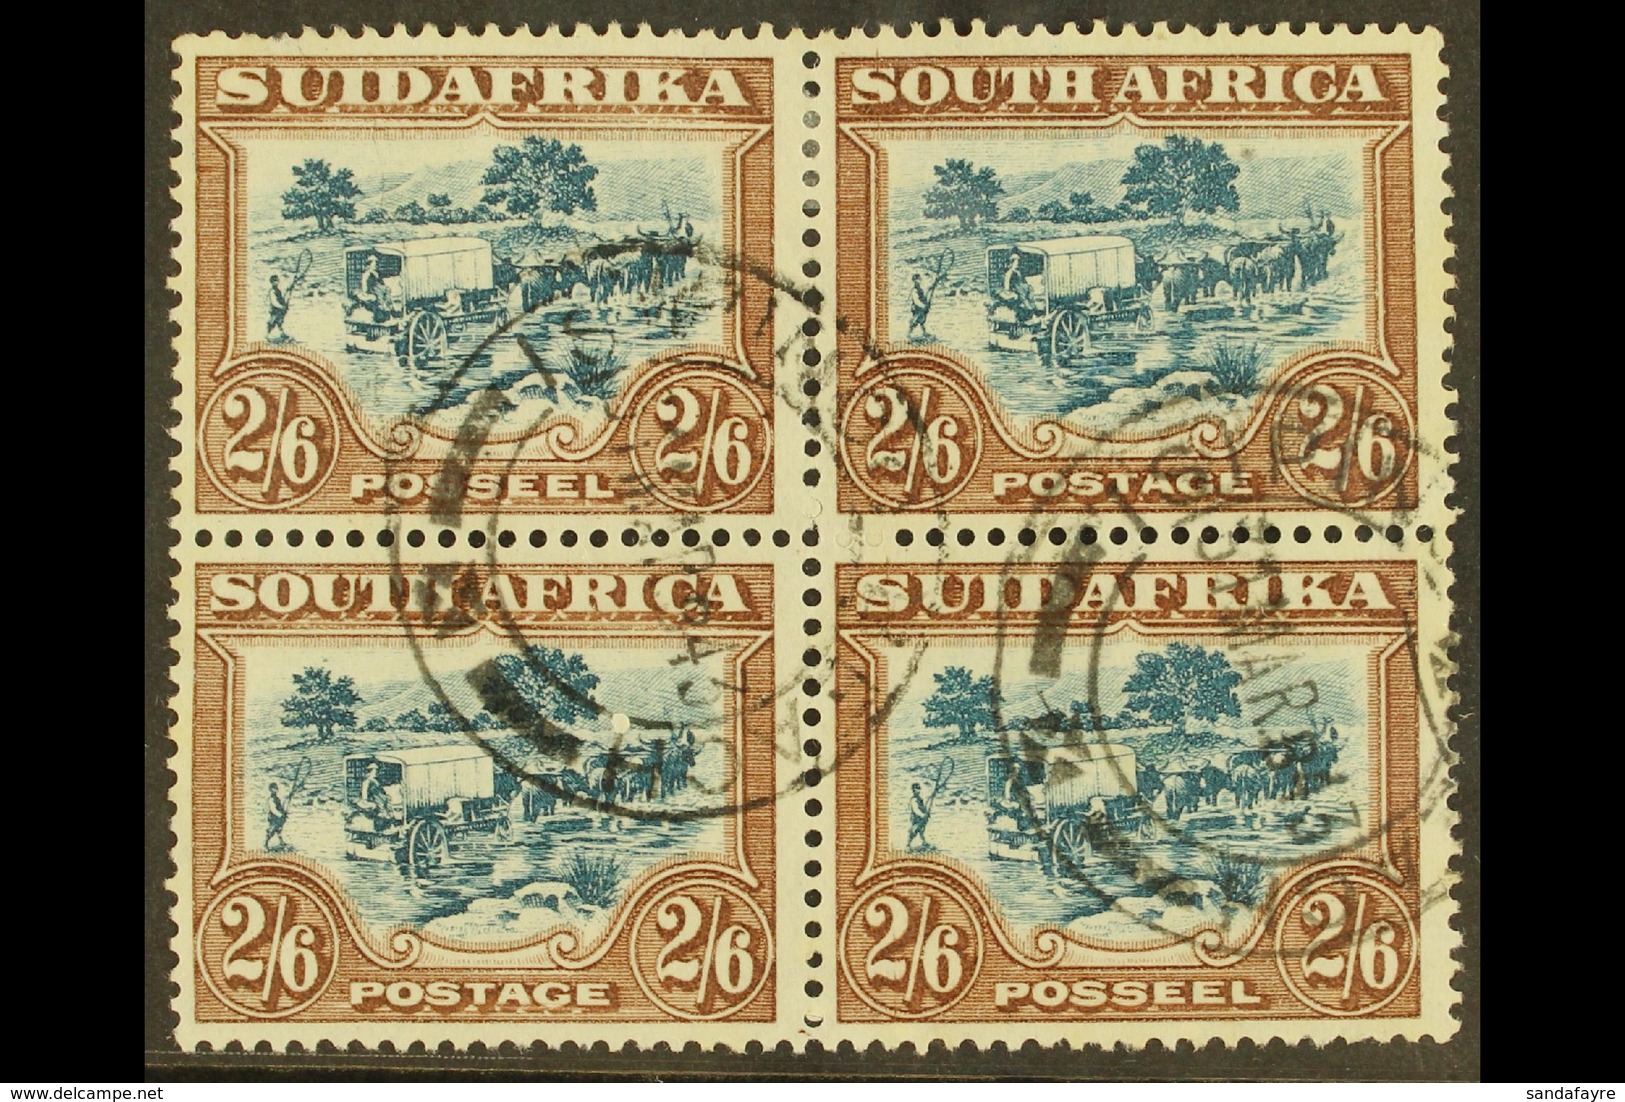 1930-44 2s6d Green & Brown, SG 49, Fine Cds Used BLOCK Of 4 Cancelled By Fully Dated "Isipingo Beach 31 Mar 43" Cds's, A - Unclassified